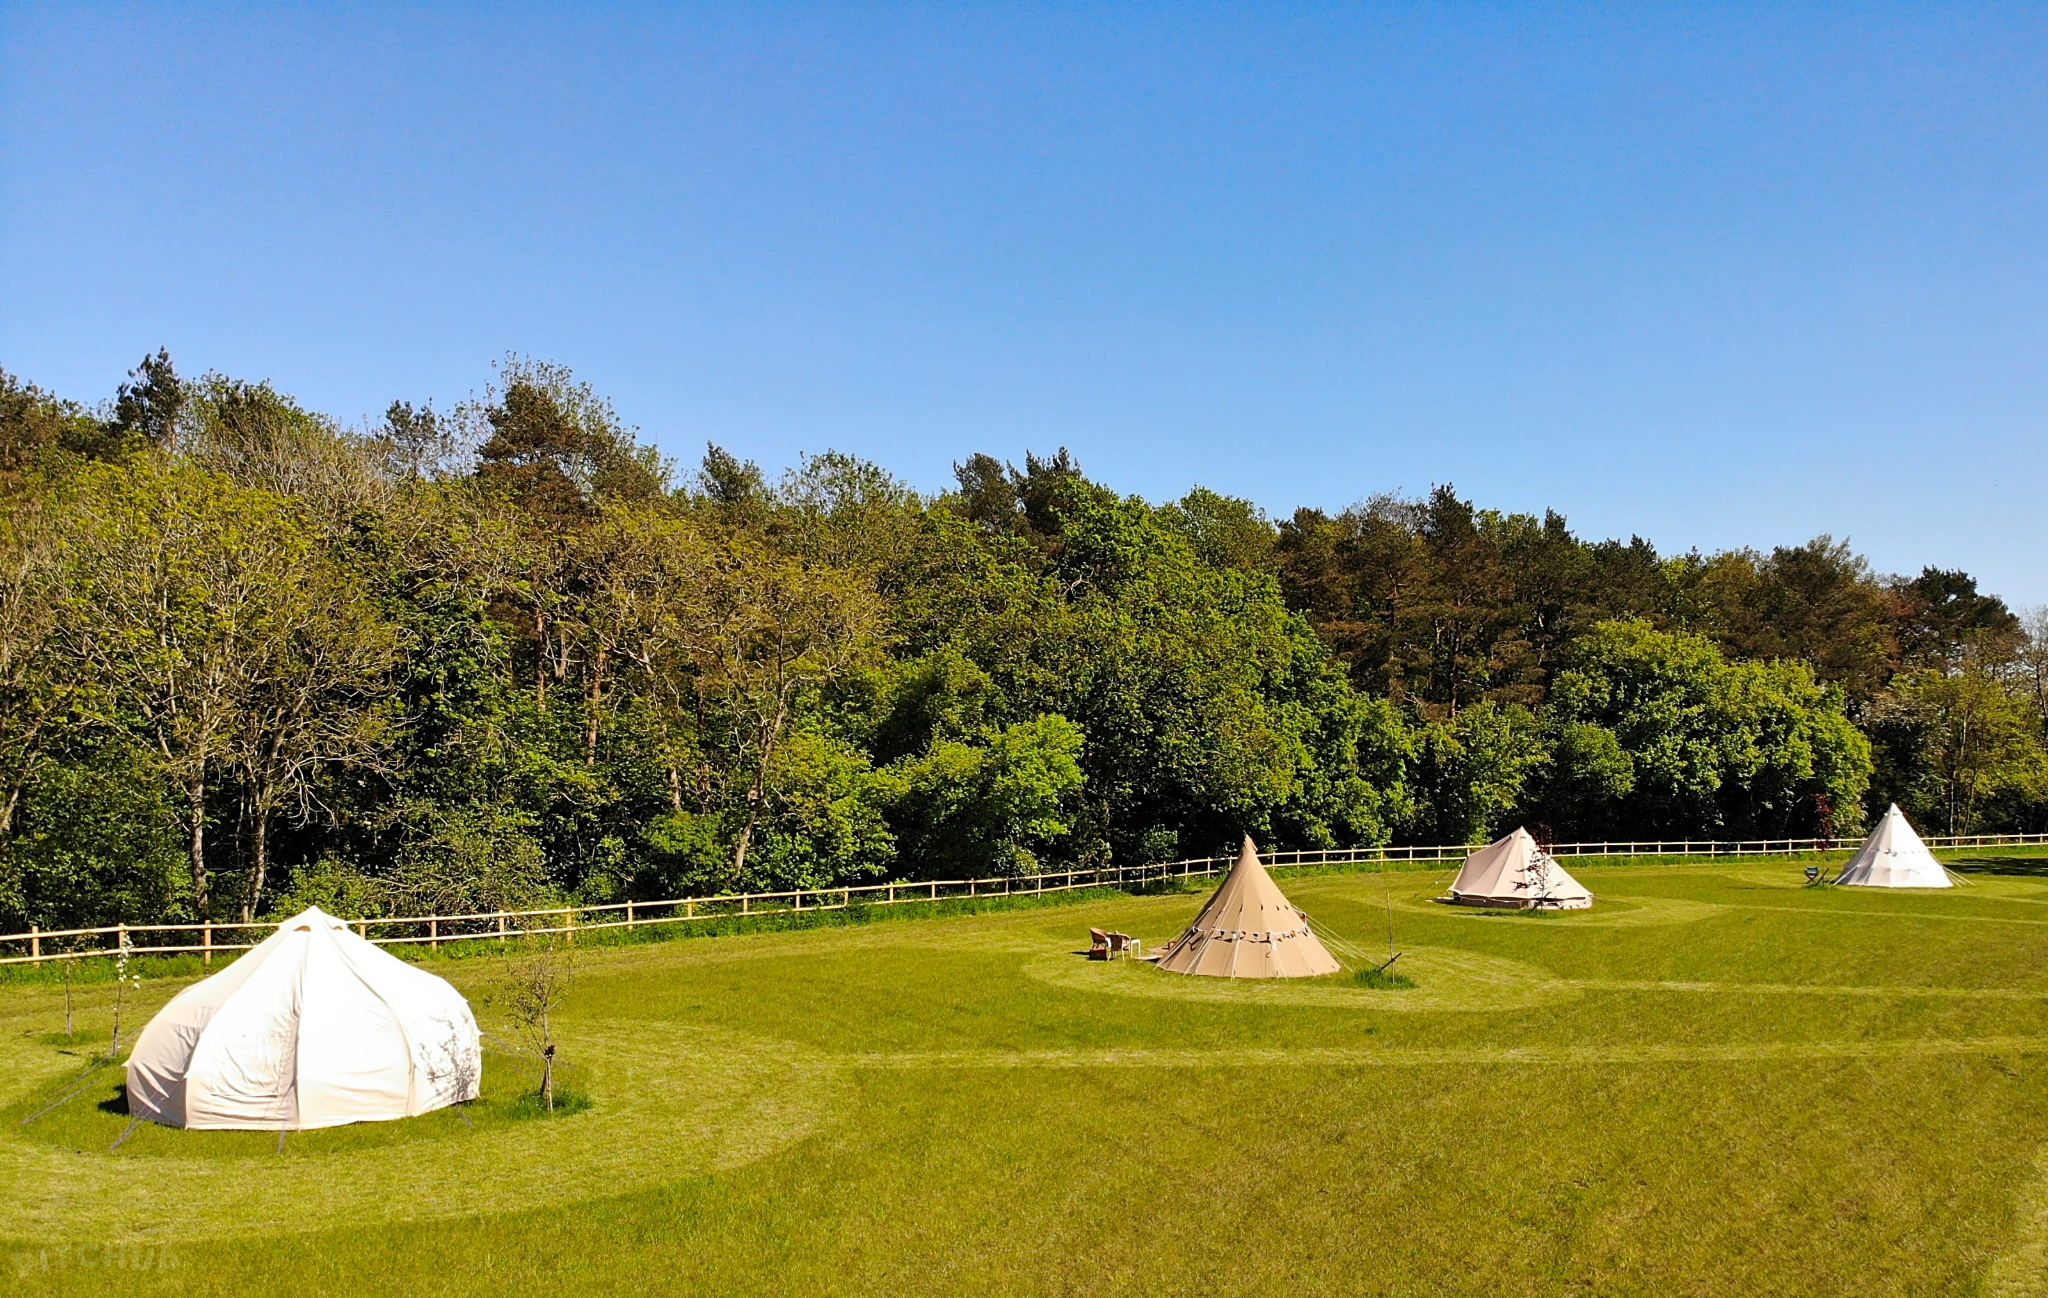 Pitch up may look like just tents, but they offer a wealth of experience in glamping in norfolk. This semi Isolated location brings you the best of both nature and town life